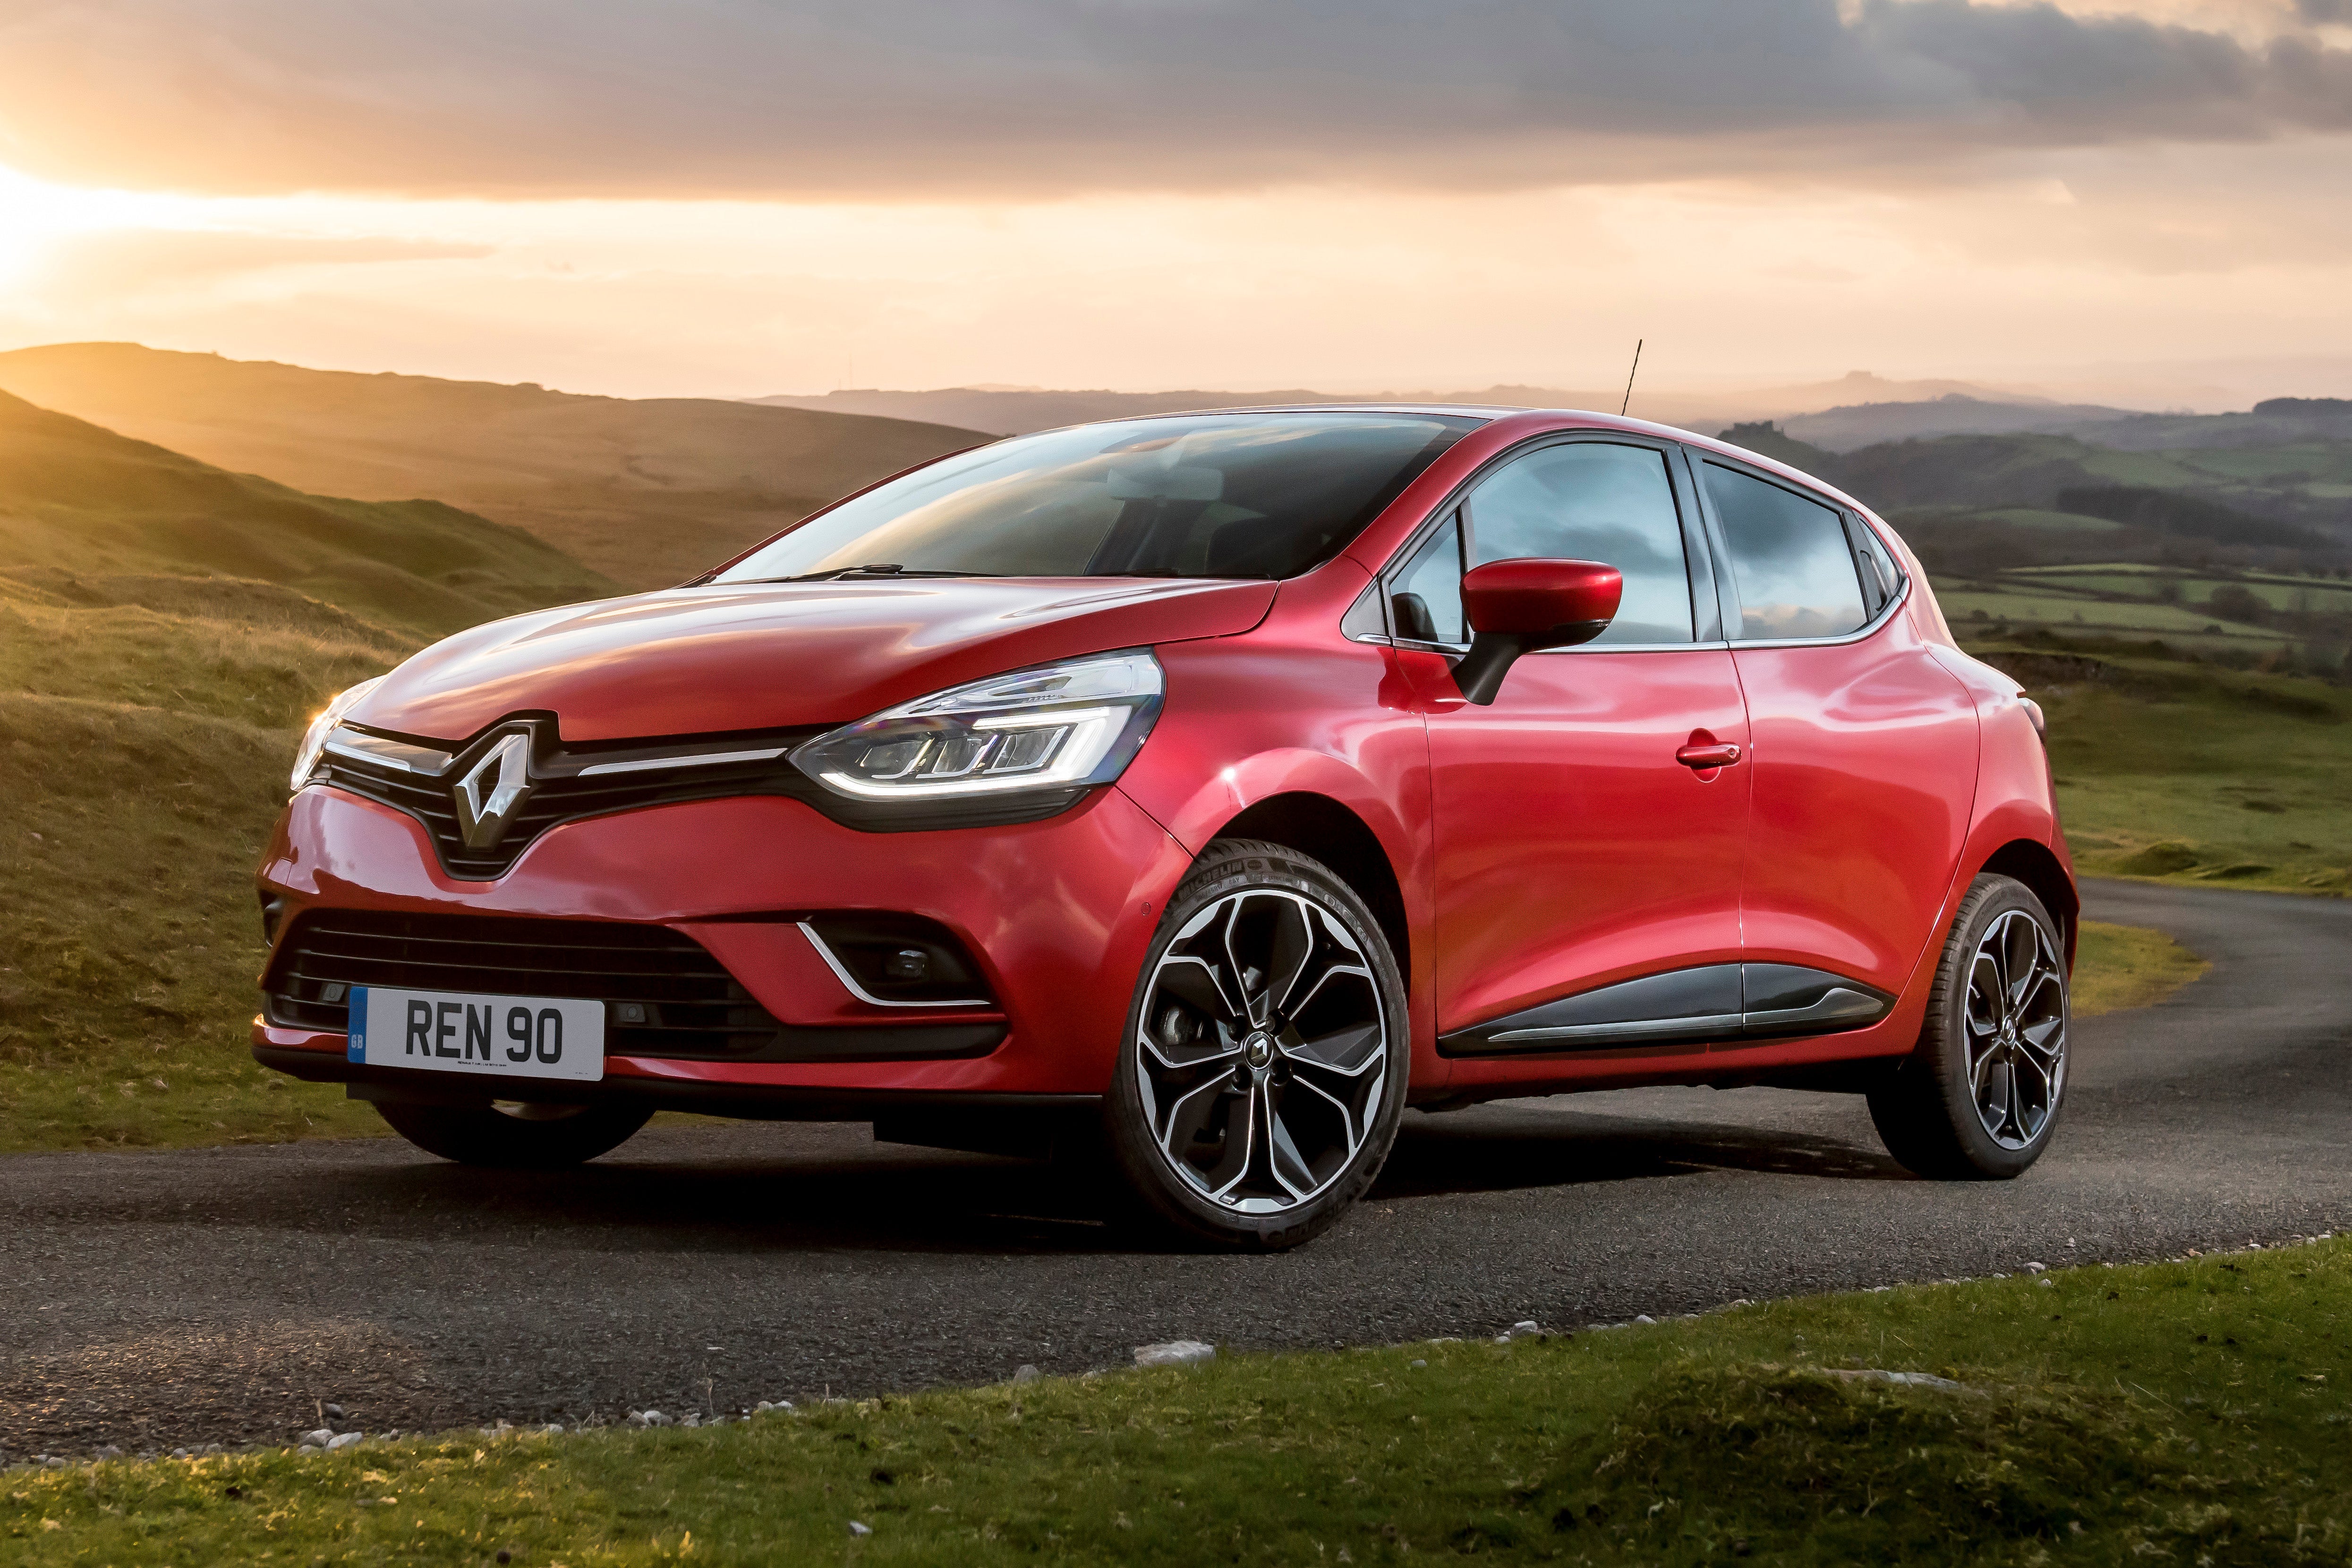 Renault Clio 4th gen. 2012 - 2019 - used car, experiences, problems - MLFREE